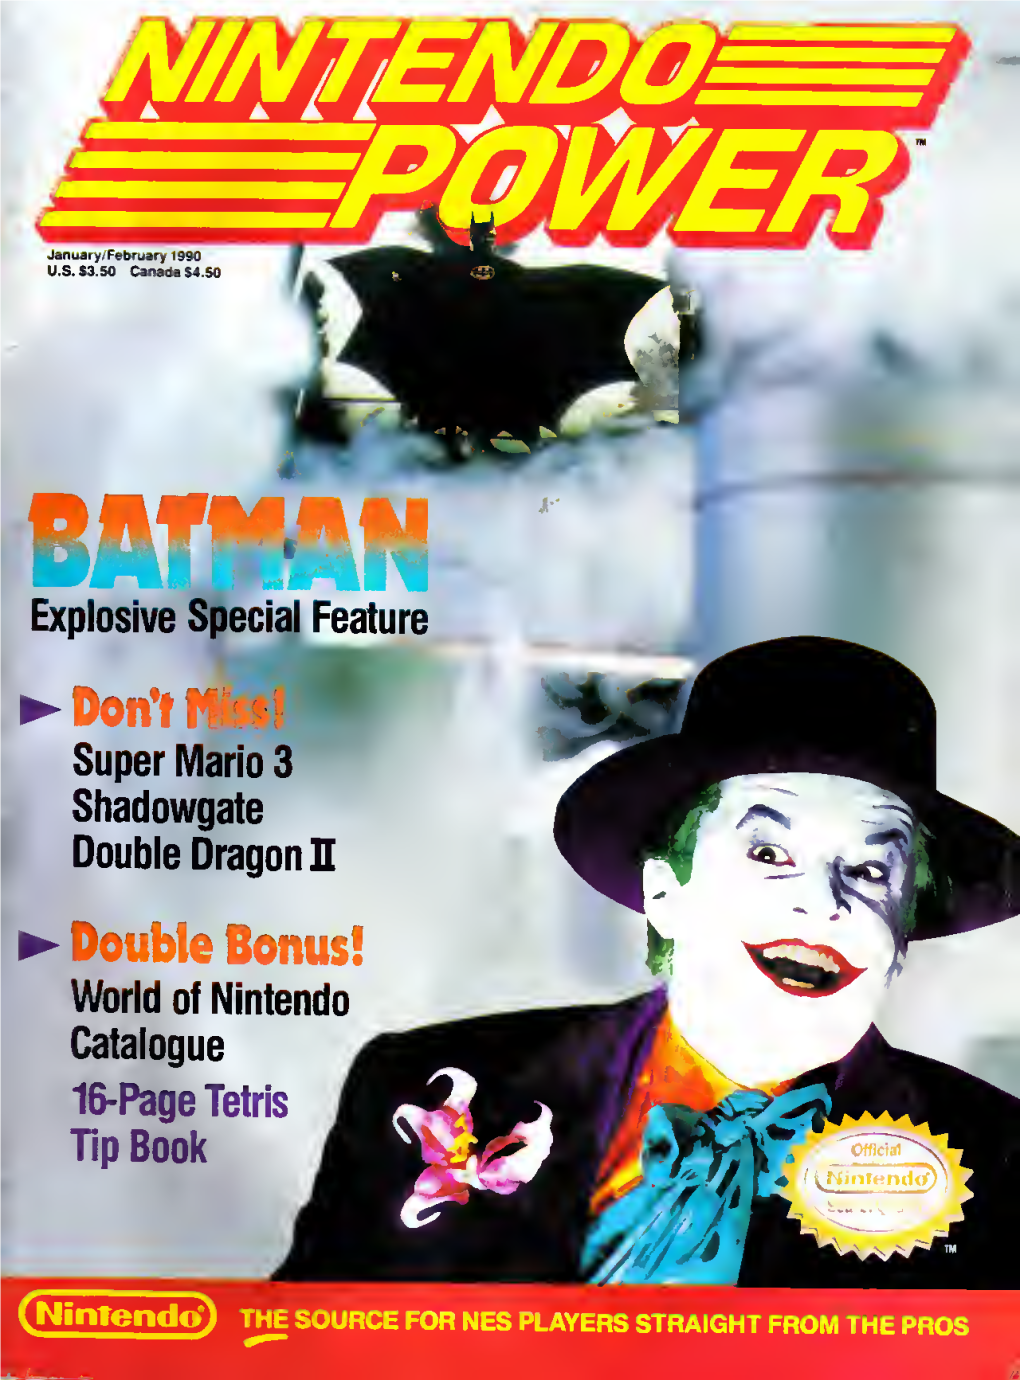 Nintendo Power.™ Have Them Get Their Own Subscription to the Direct Connection to the Pros at Nintendo Headquarters